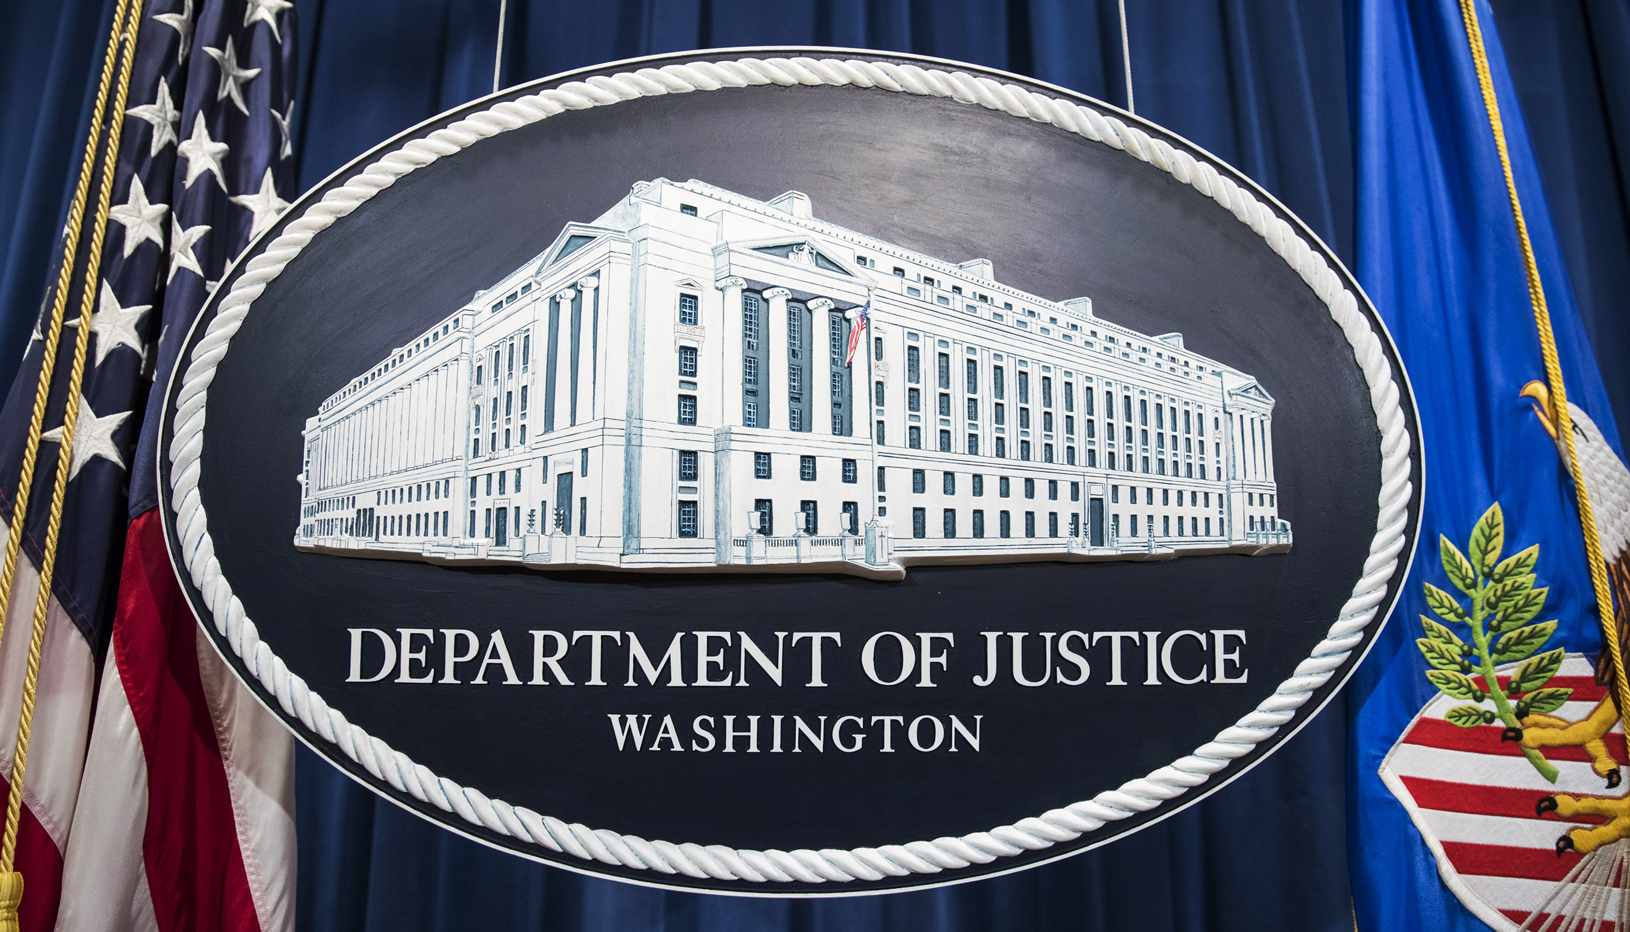 The Department of Justice seal